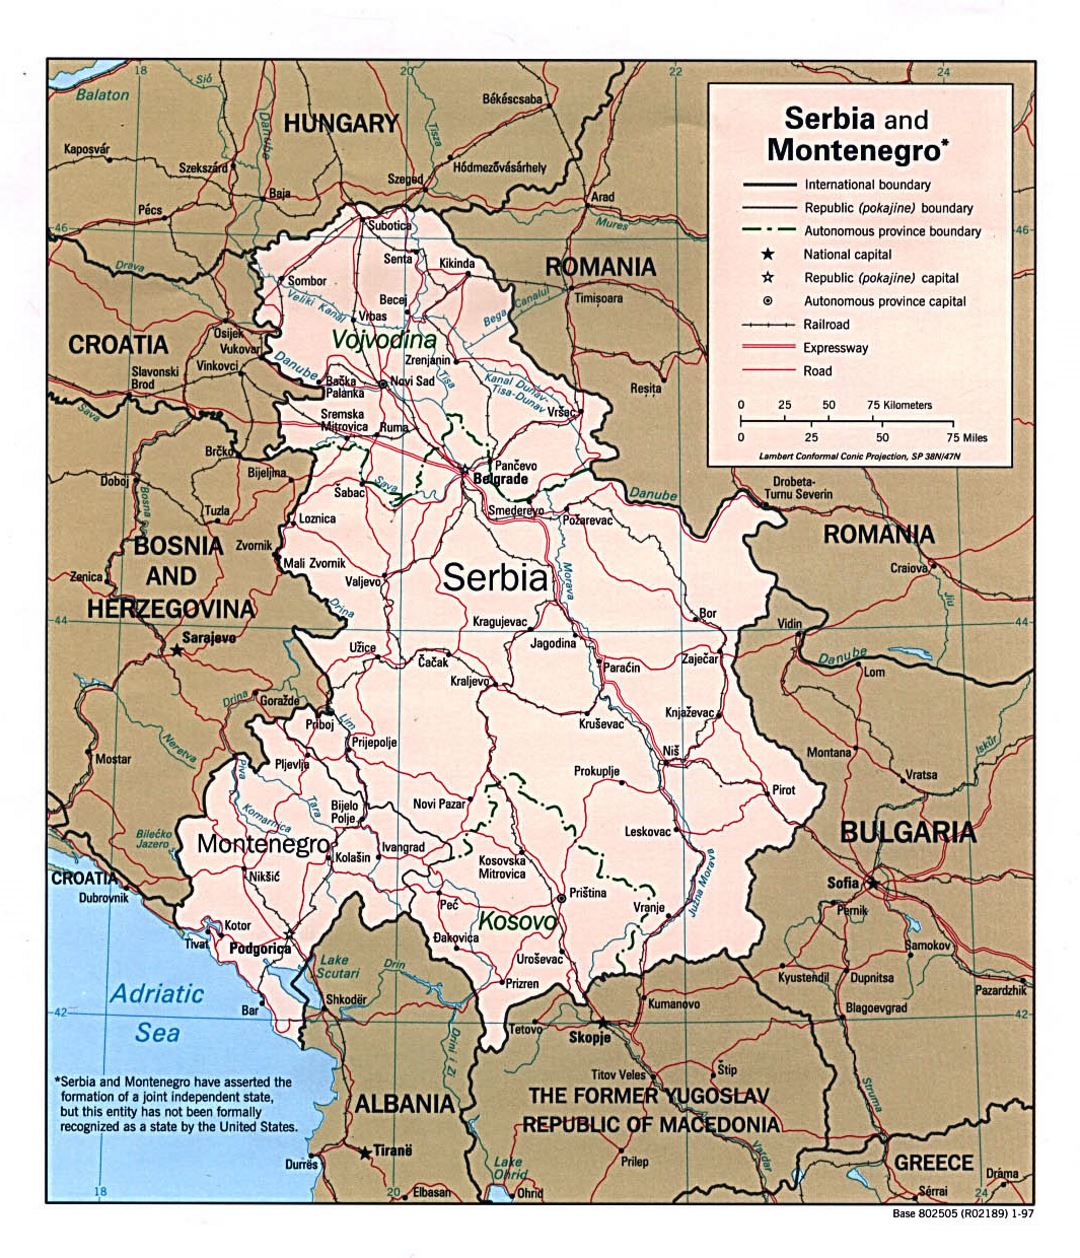 Detailed political map of Serbia and Montenegro - 1997